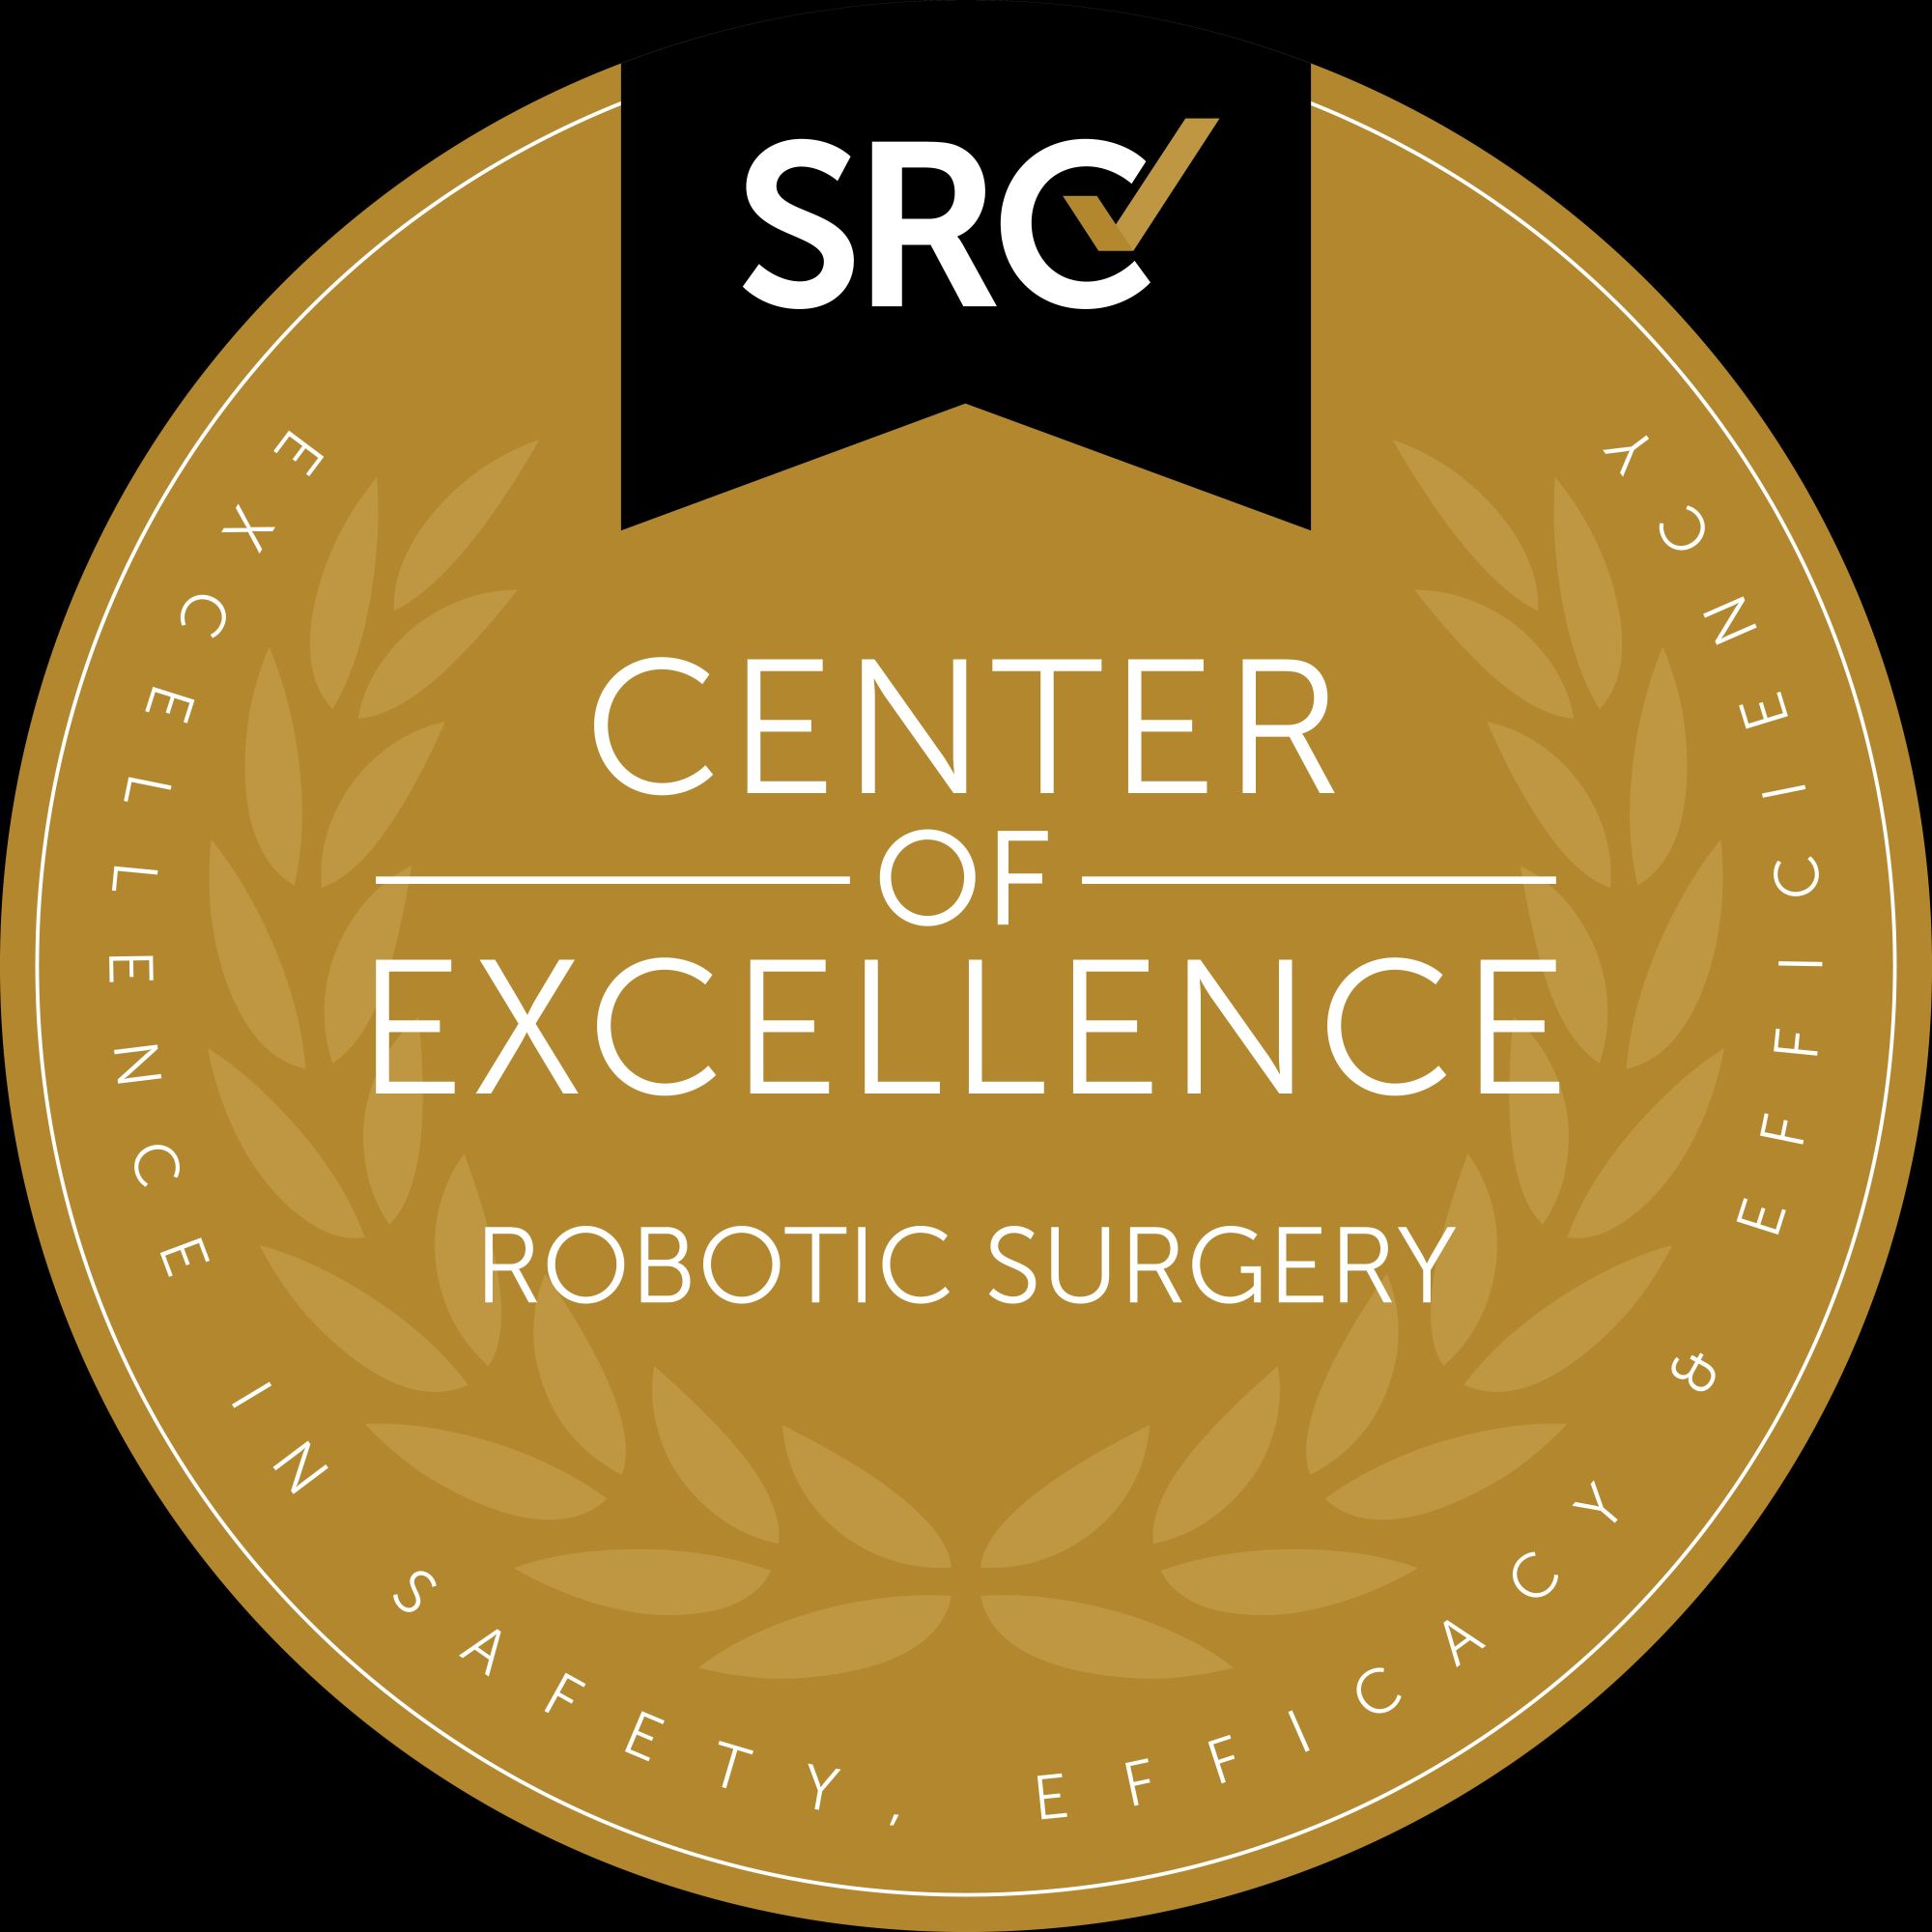 Center of excellence robotic surgery